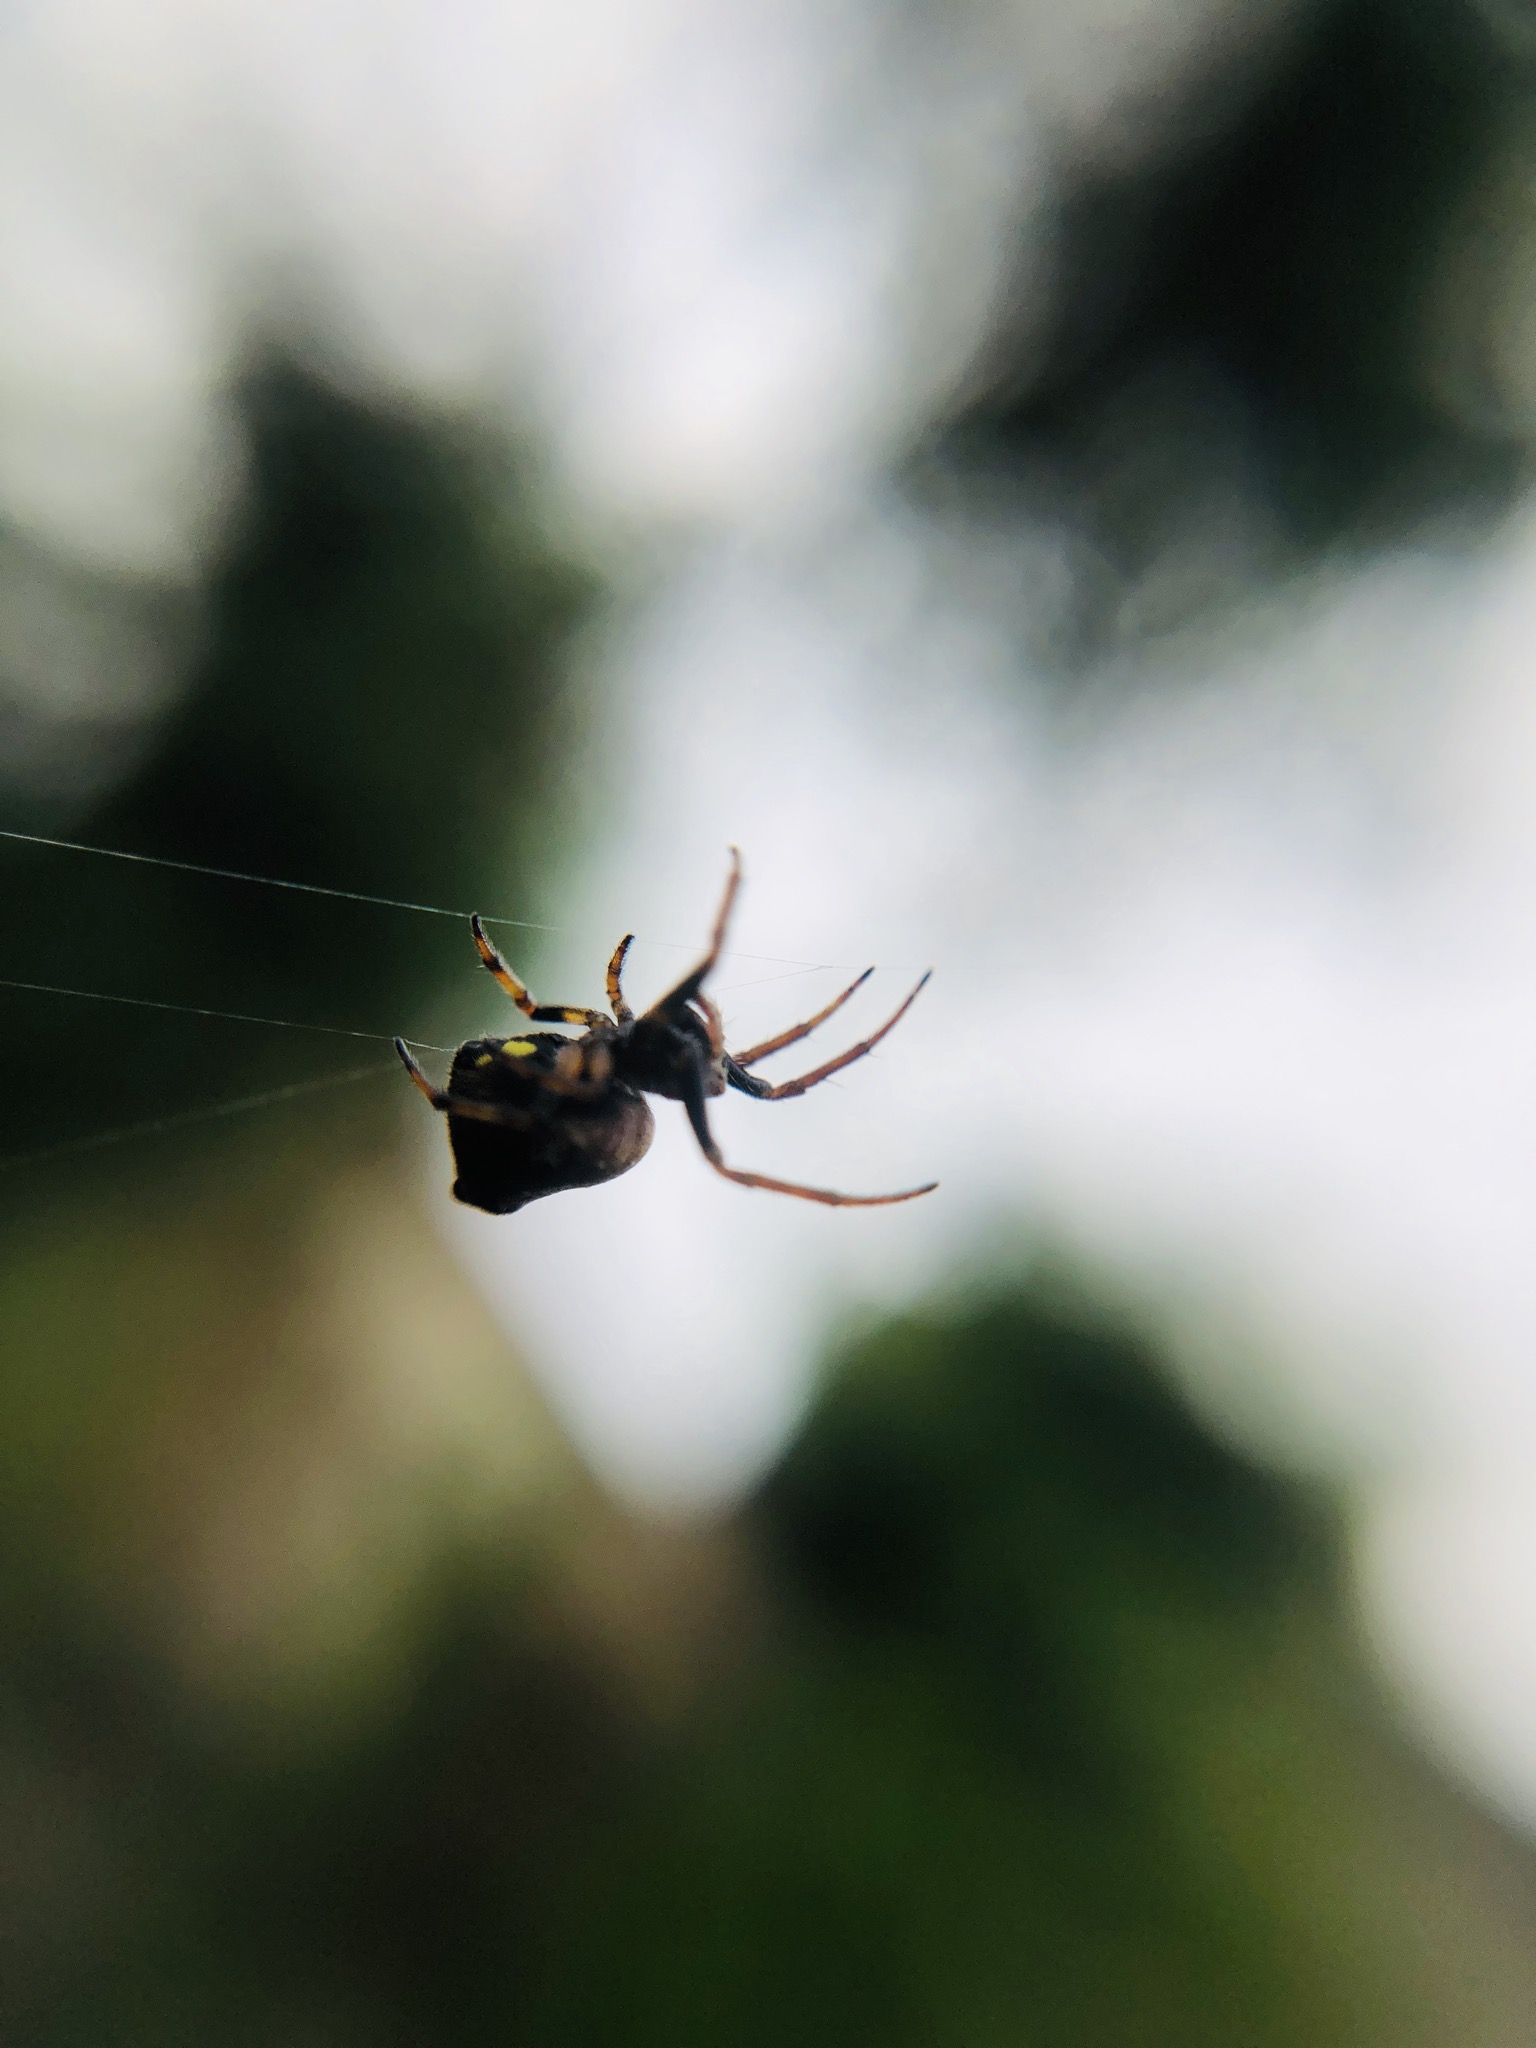 Spider holding on to a web